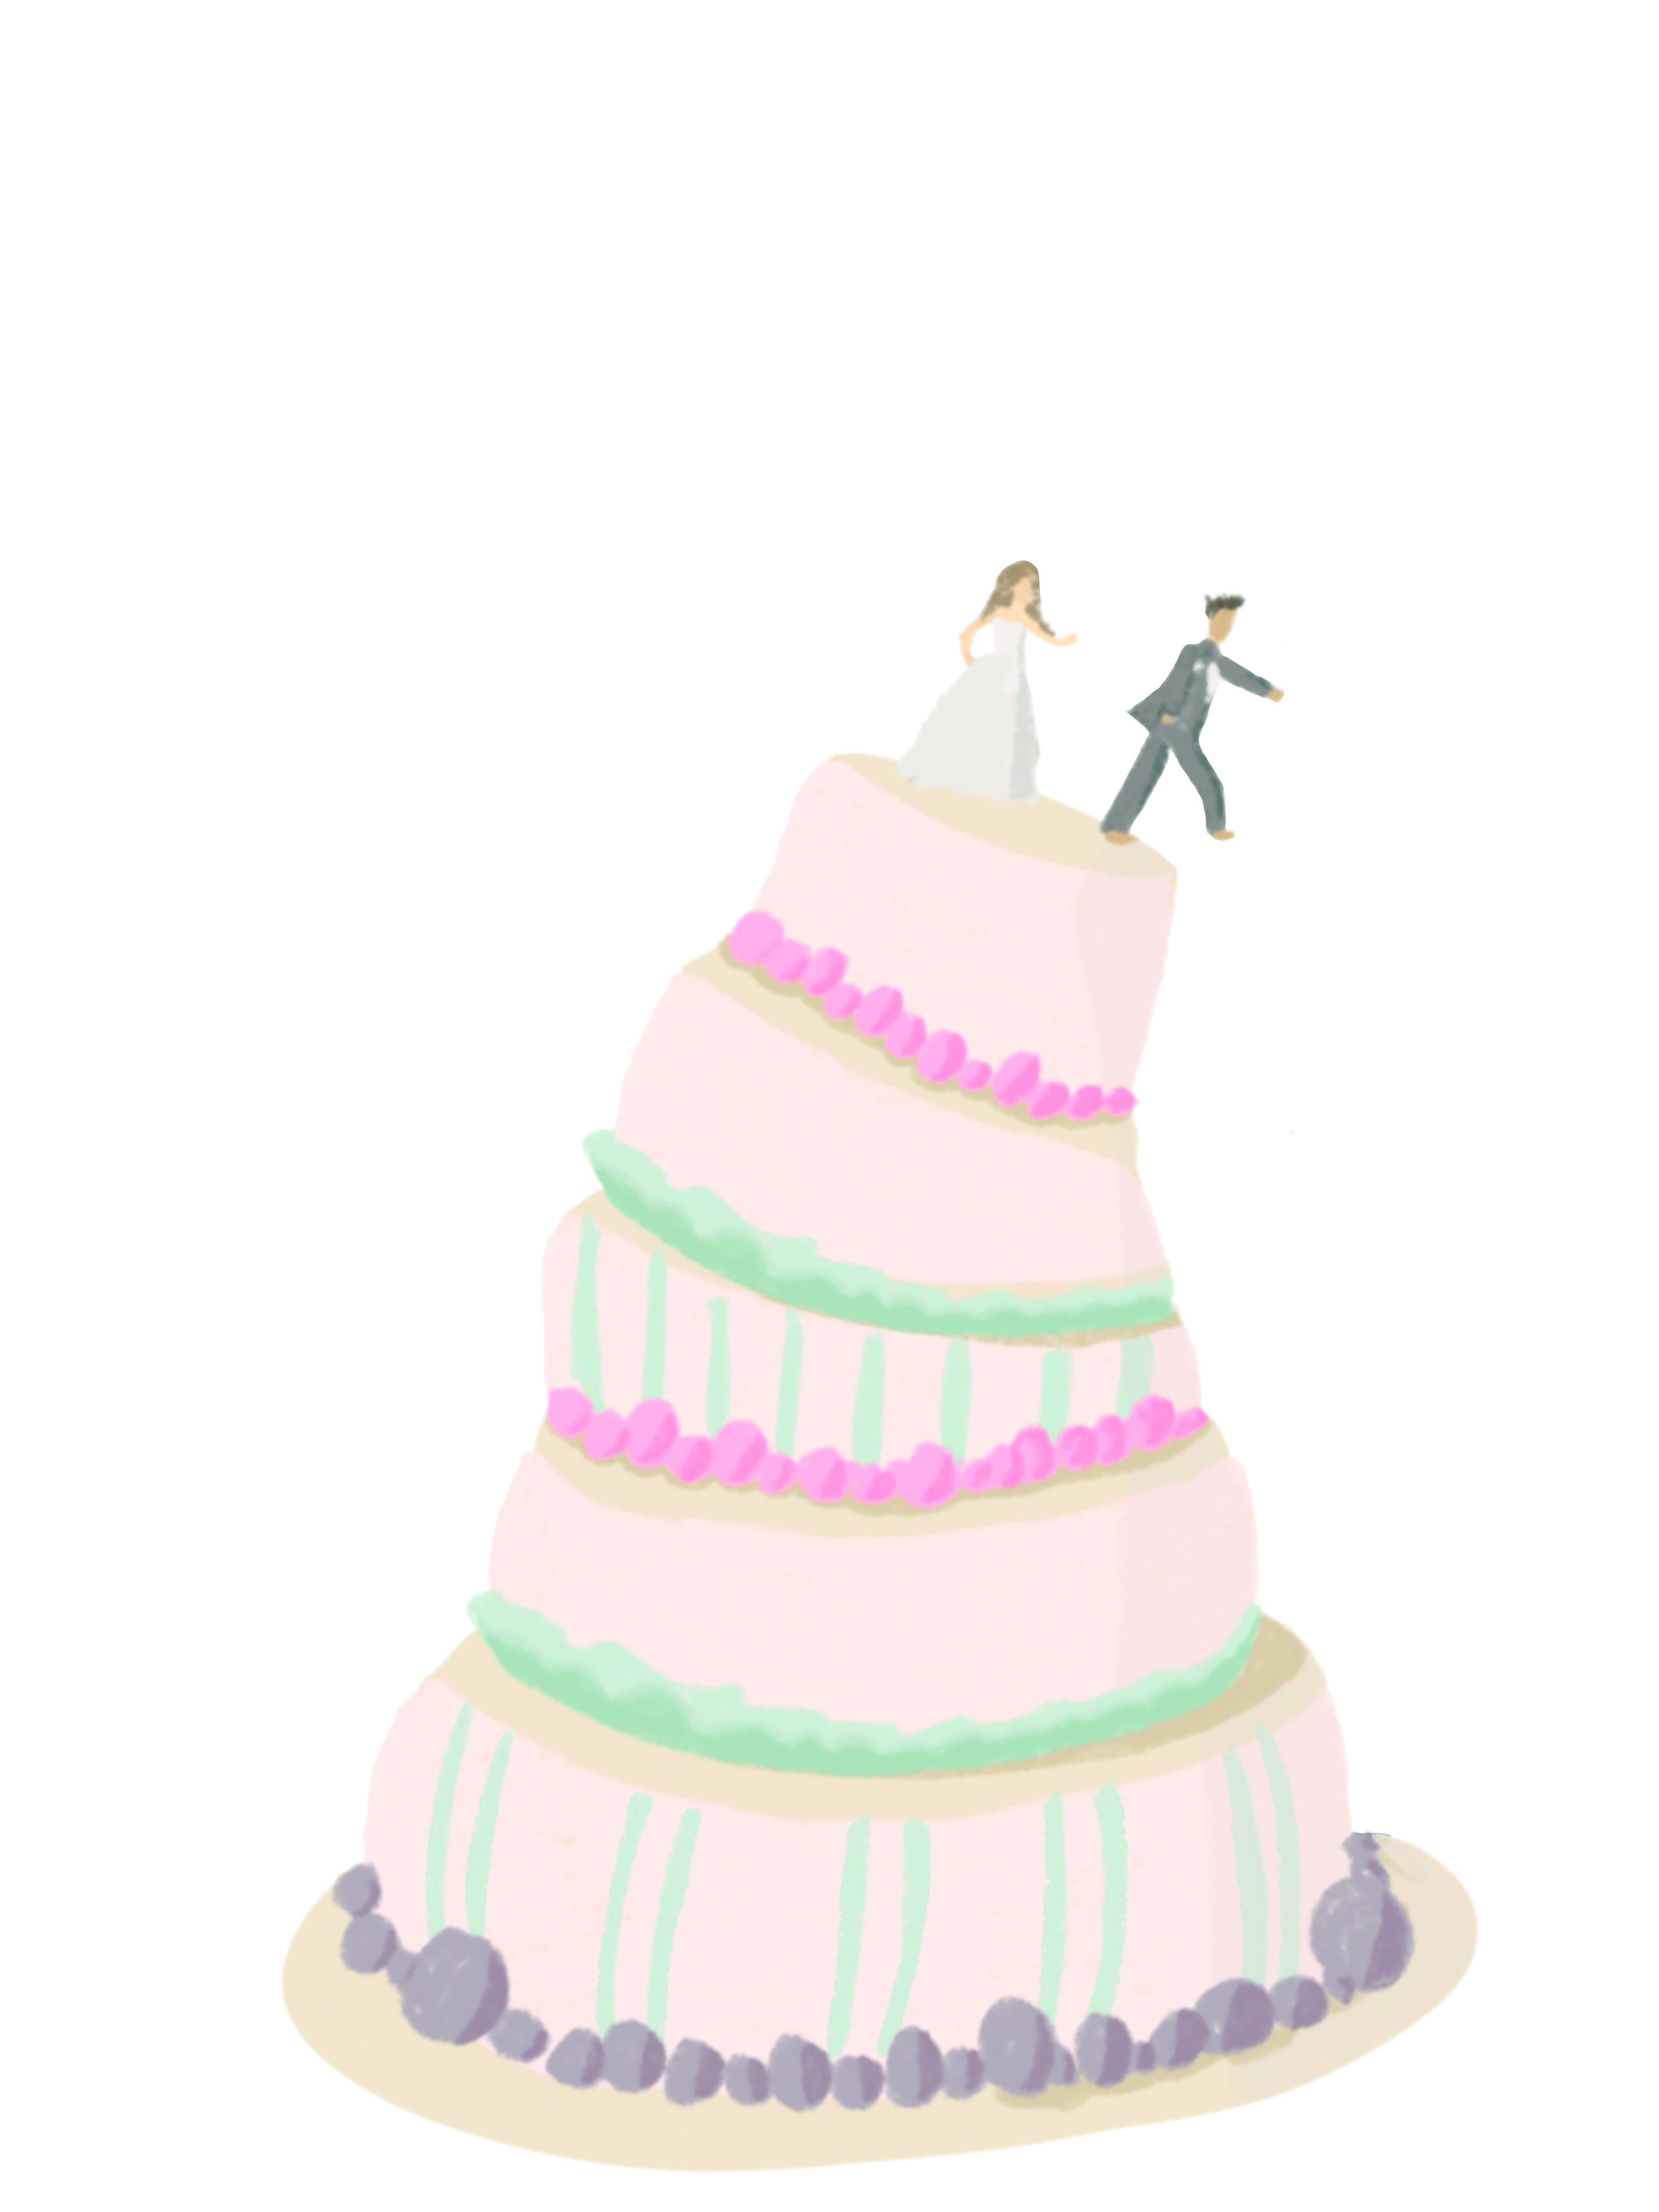 Cartoon wedding cake with a bridge and groom fighting on top. The title Much Ado About Nothing is above them.